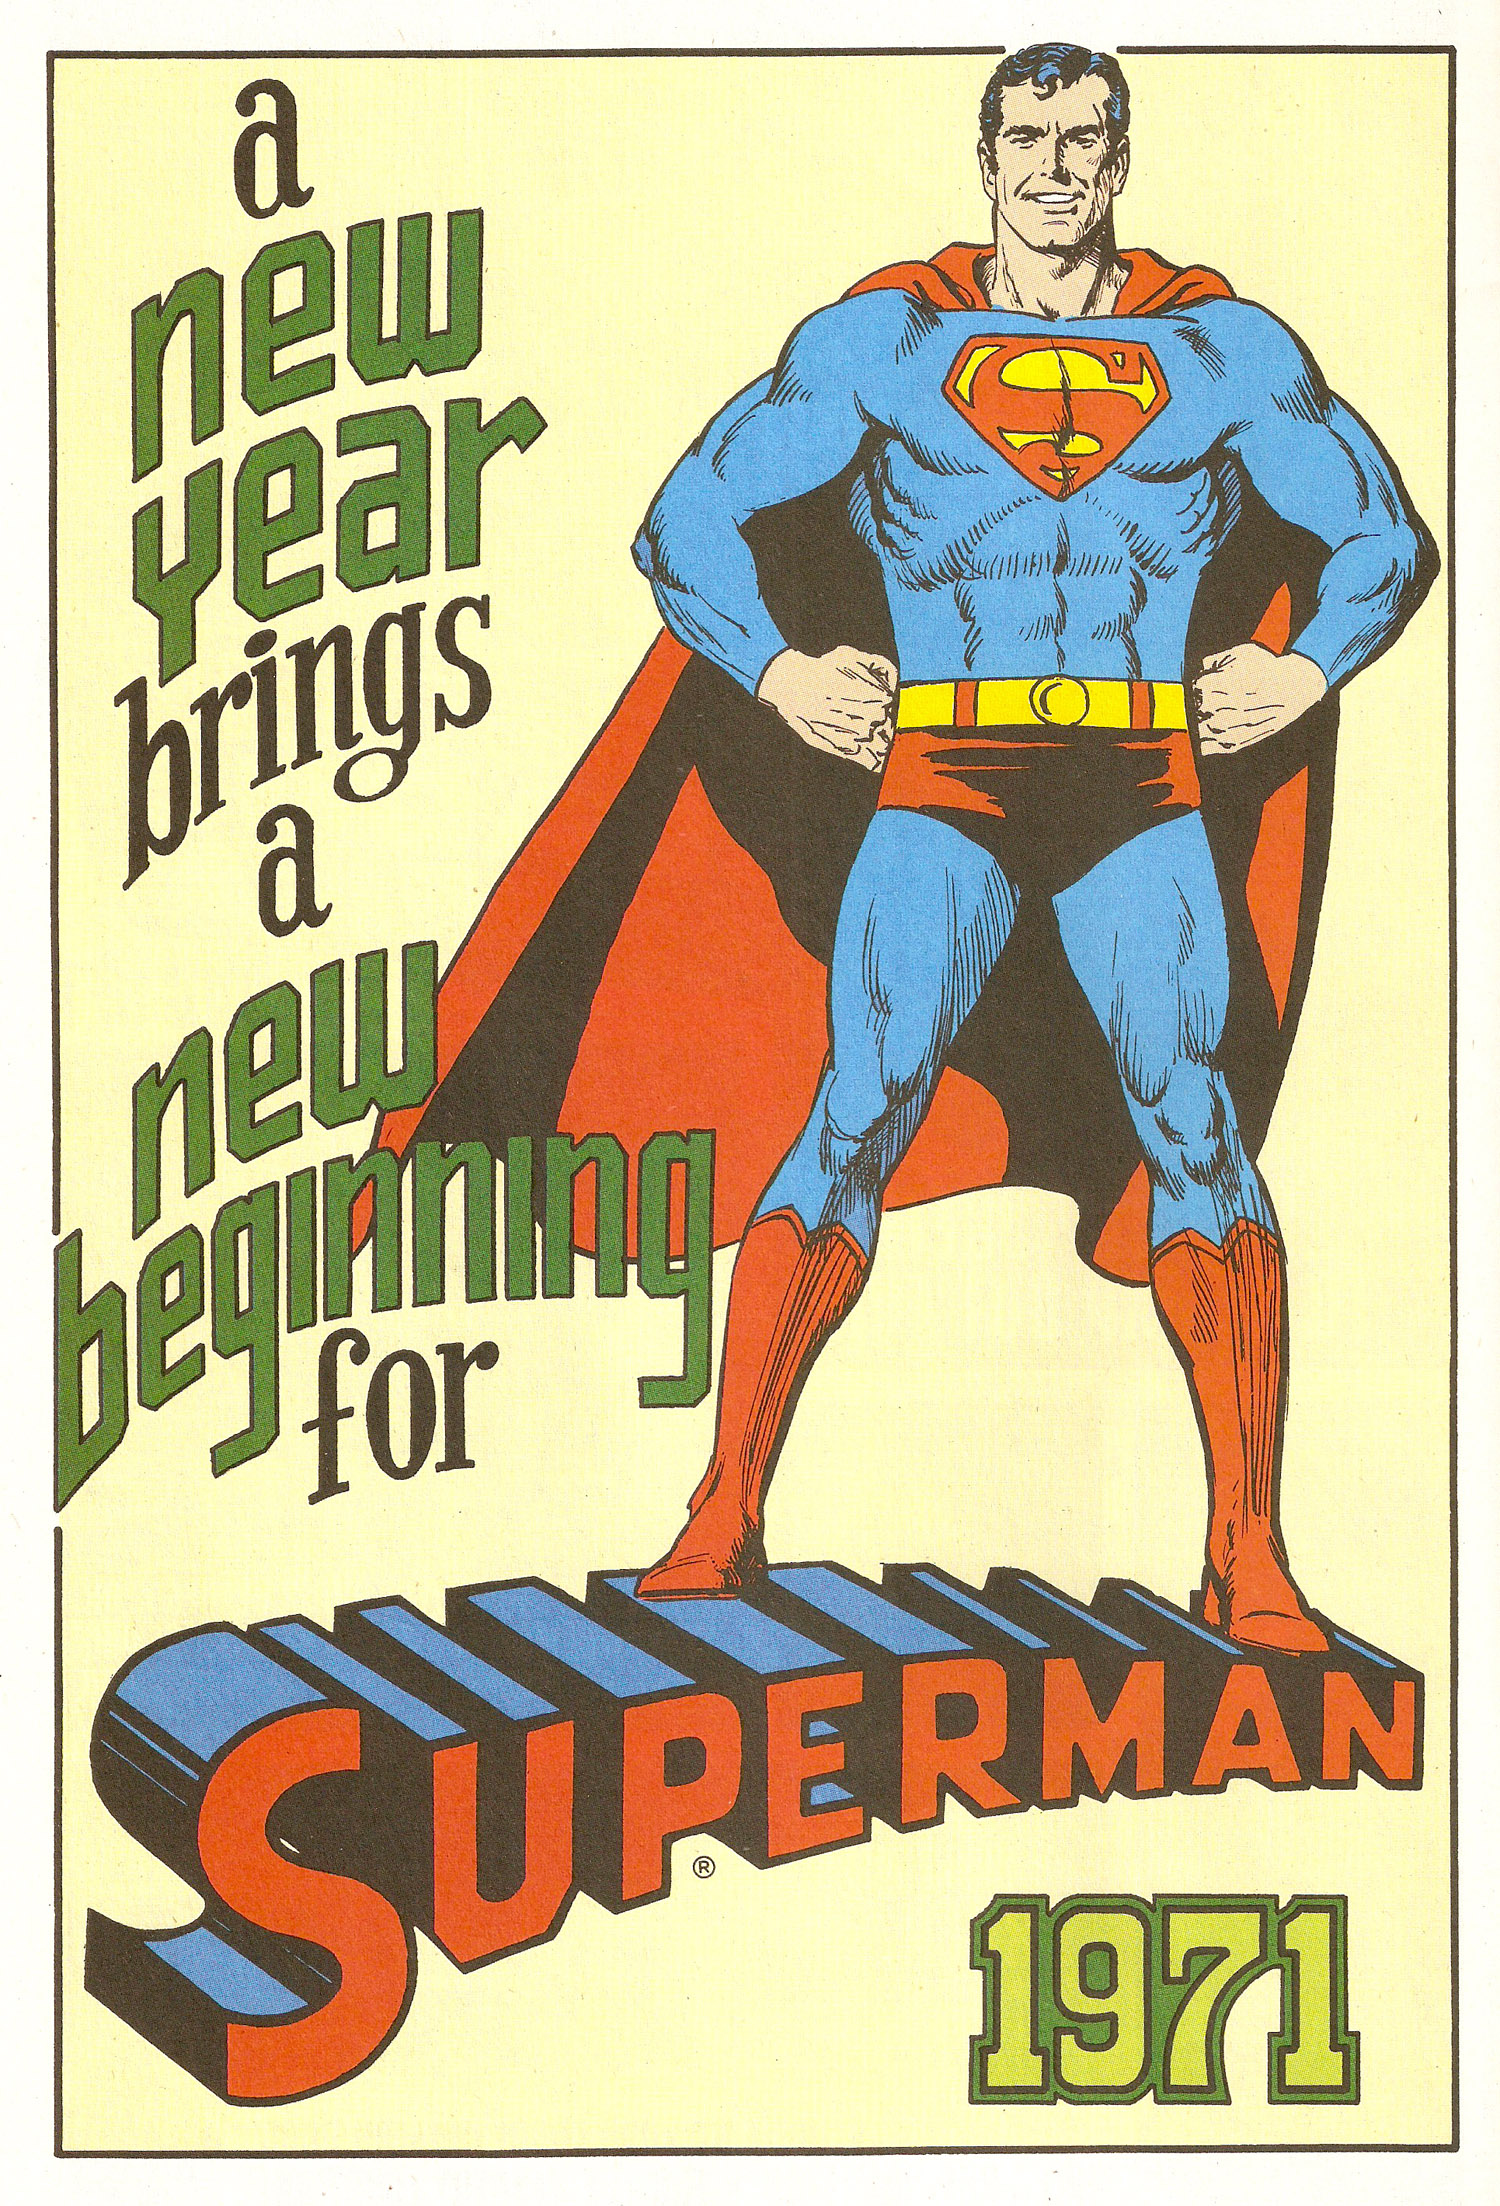 Ad- Superman in 1971 Clean 1